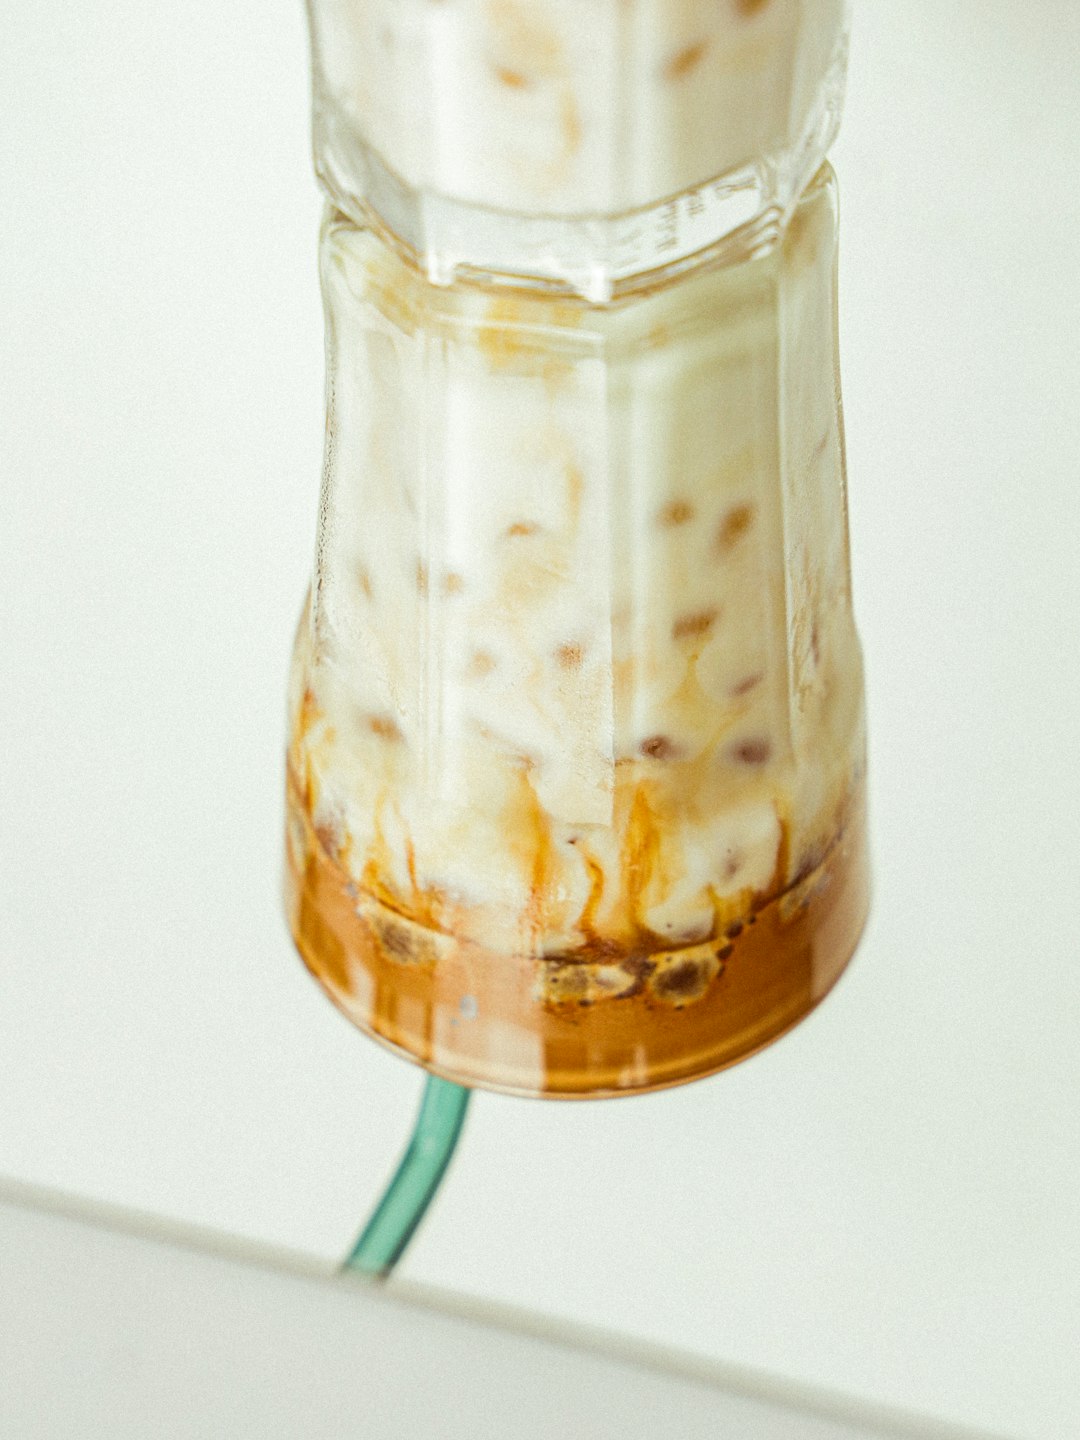 clear glass jar with white liquid